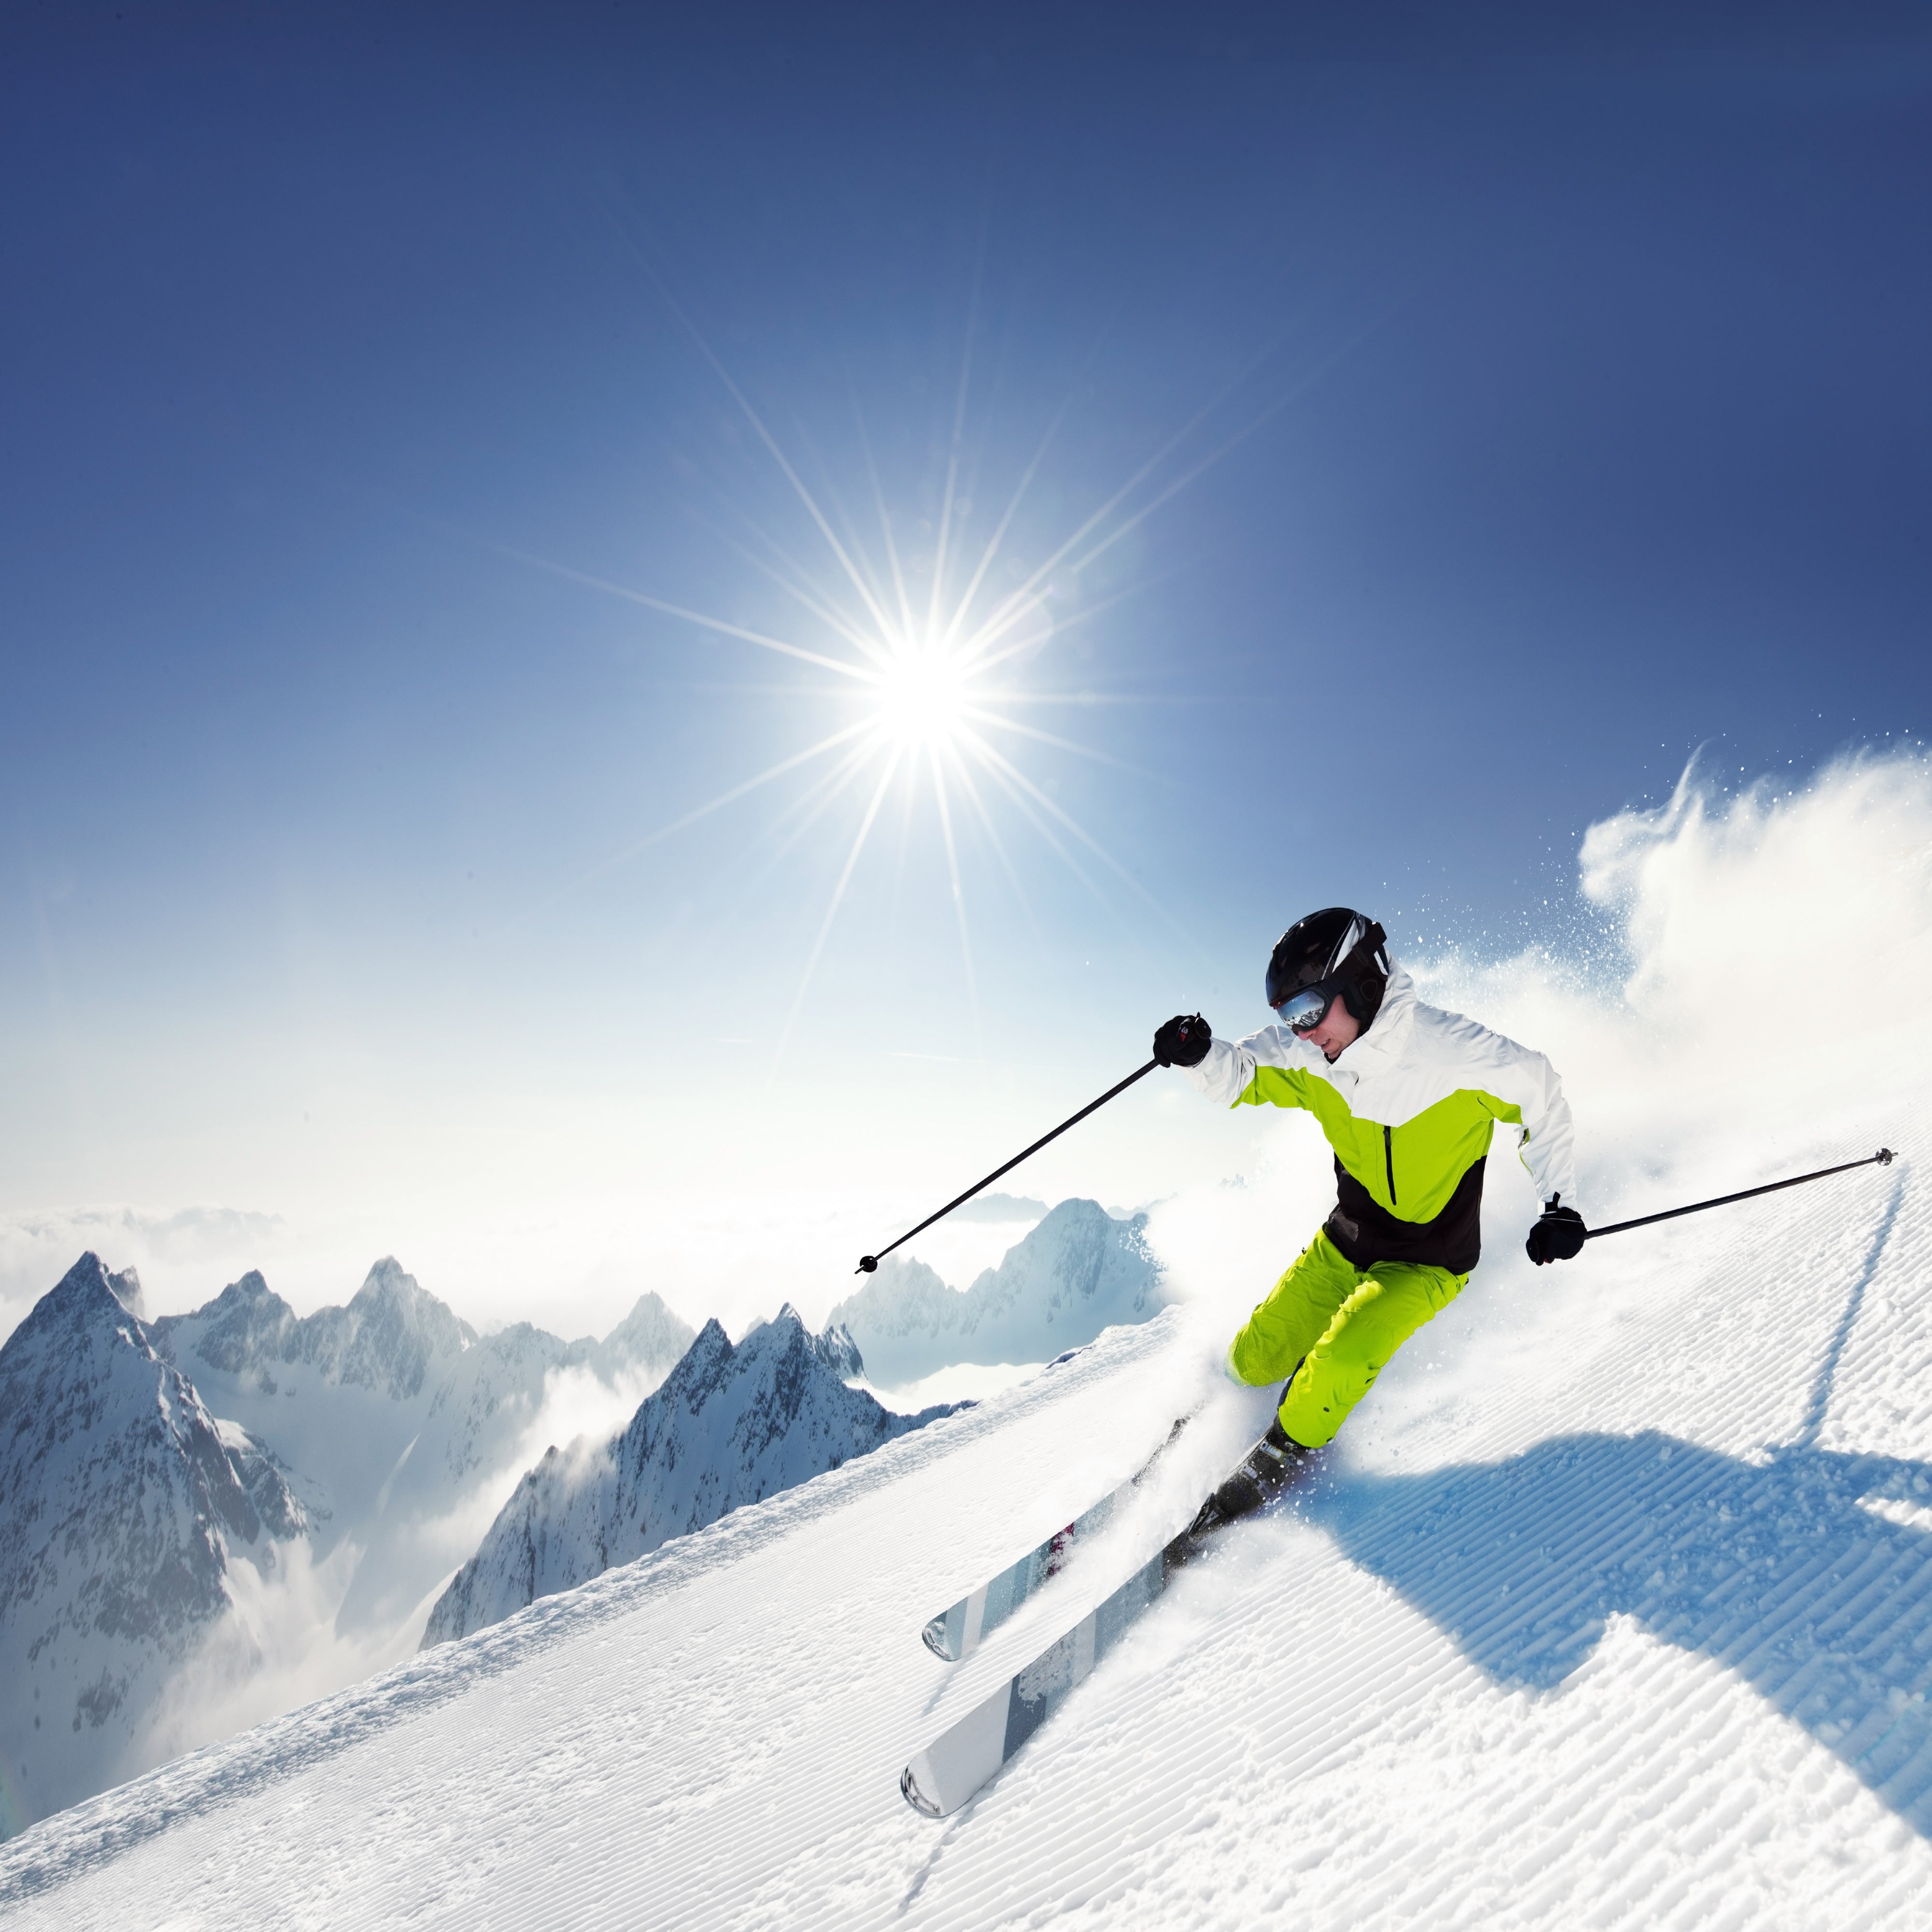 Person skiing on a bright, sunny day - example of holiday photography